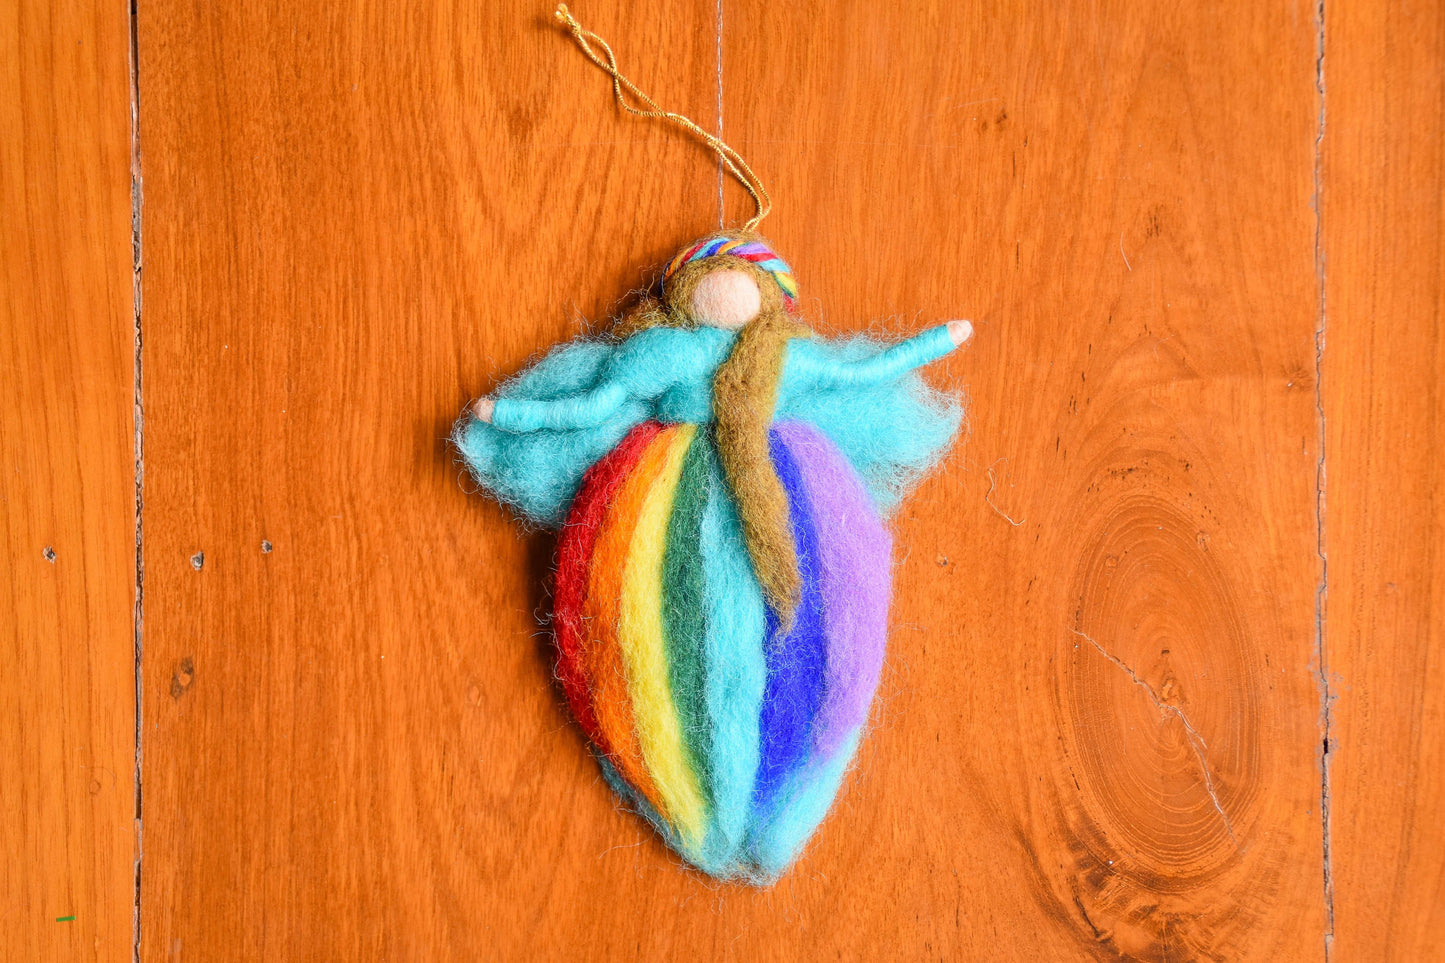 This Global Groove Life, handmade, ethical, fair trade, eco-friendly, sustainable, blue felt, rainbow angel fairy ornament, was created by artisans in Kathmandu Nepal and will be a beautiful addition to your Christmas tree this holiday season.